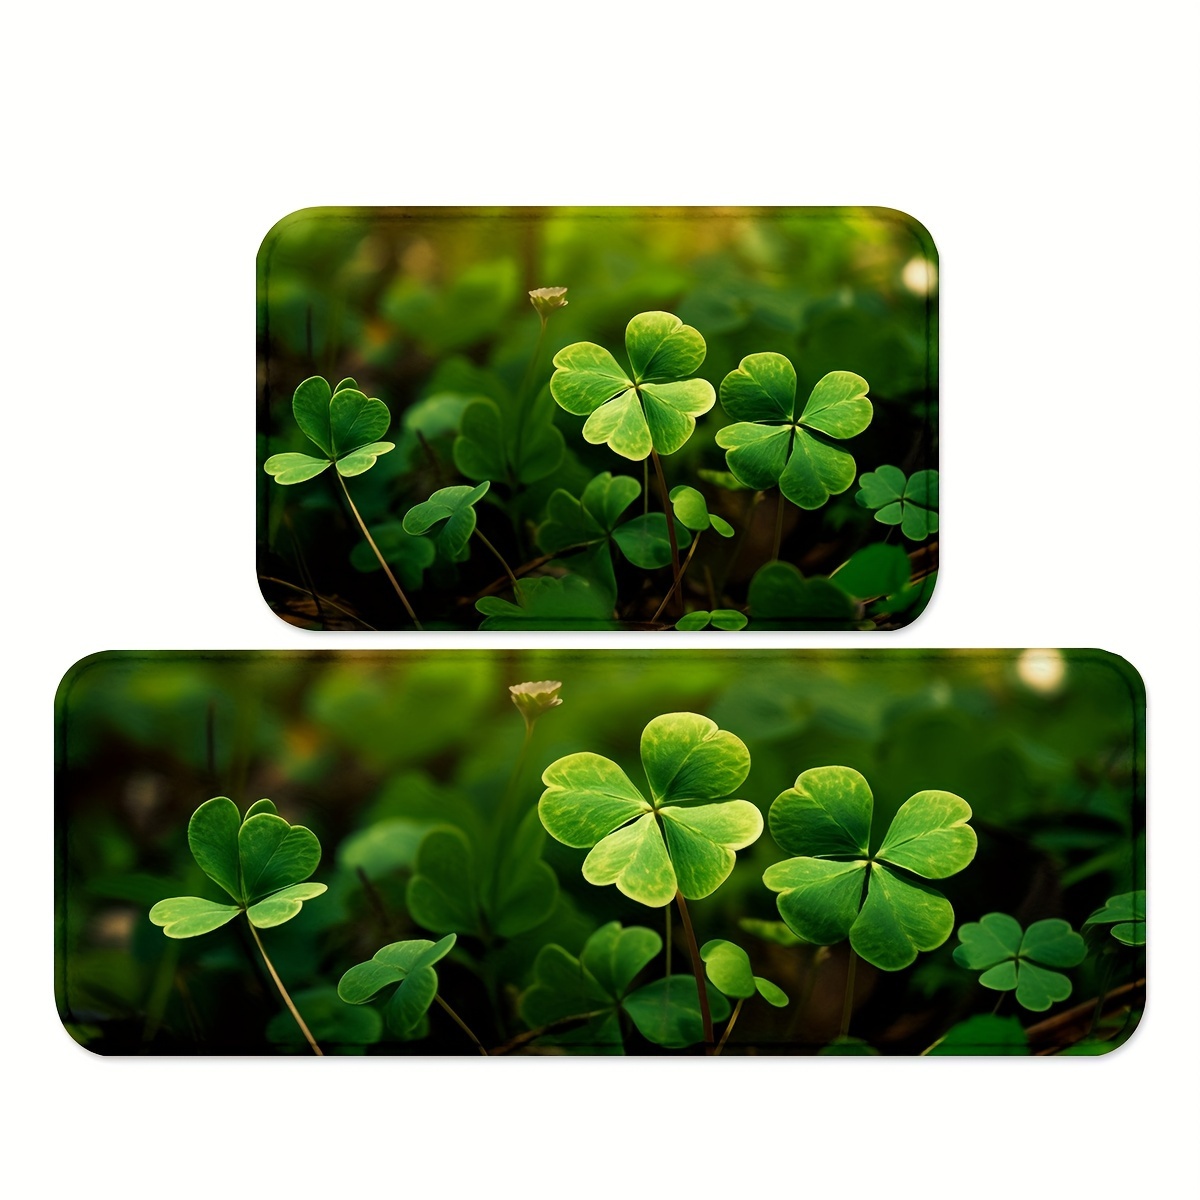 

1/2pcs Fresh Leaf Pattern Kitchen Mats, Anti-skid Foyer Rugs, Cozy Patio Cushions, Carpets For Home Office Sink Spring Decor High Traffic Area St. Patrick's Day Hotel Restaurant Indoors